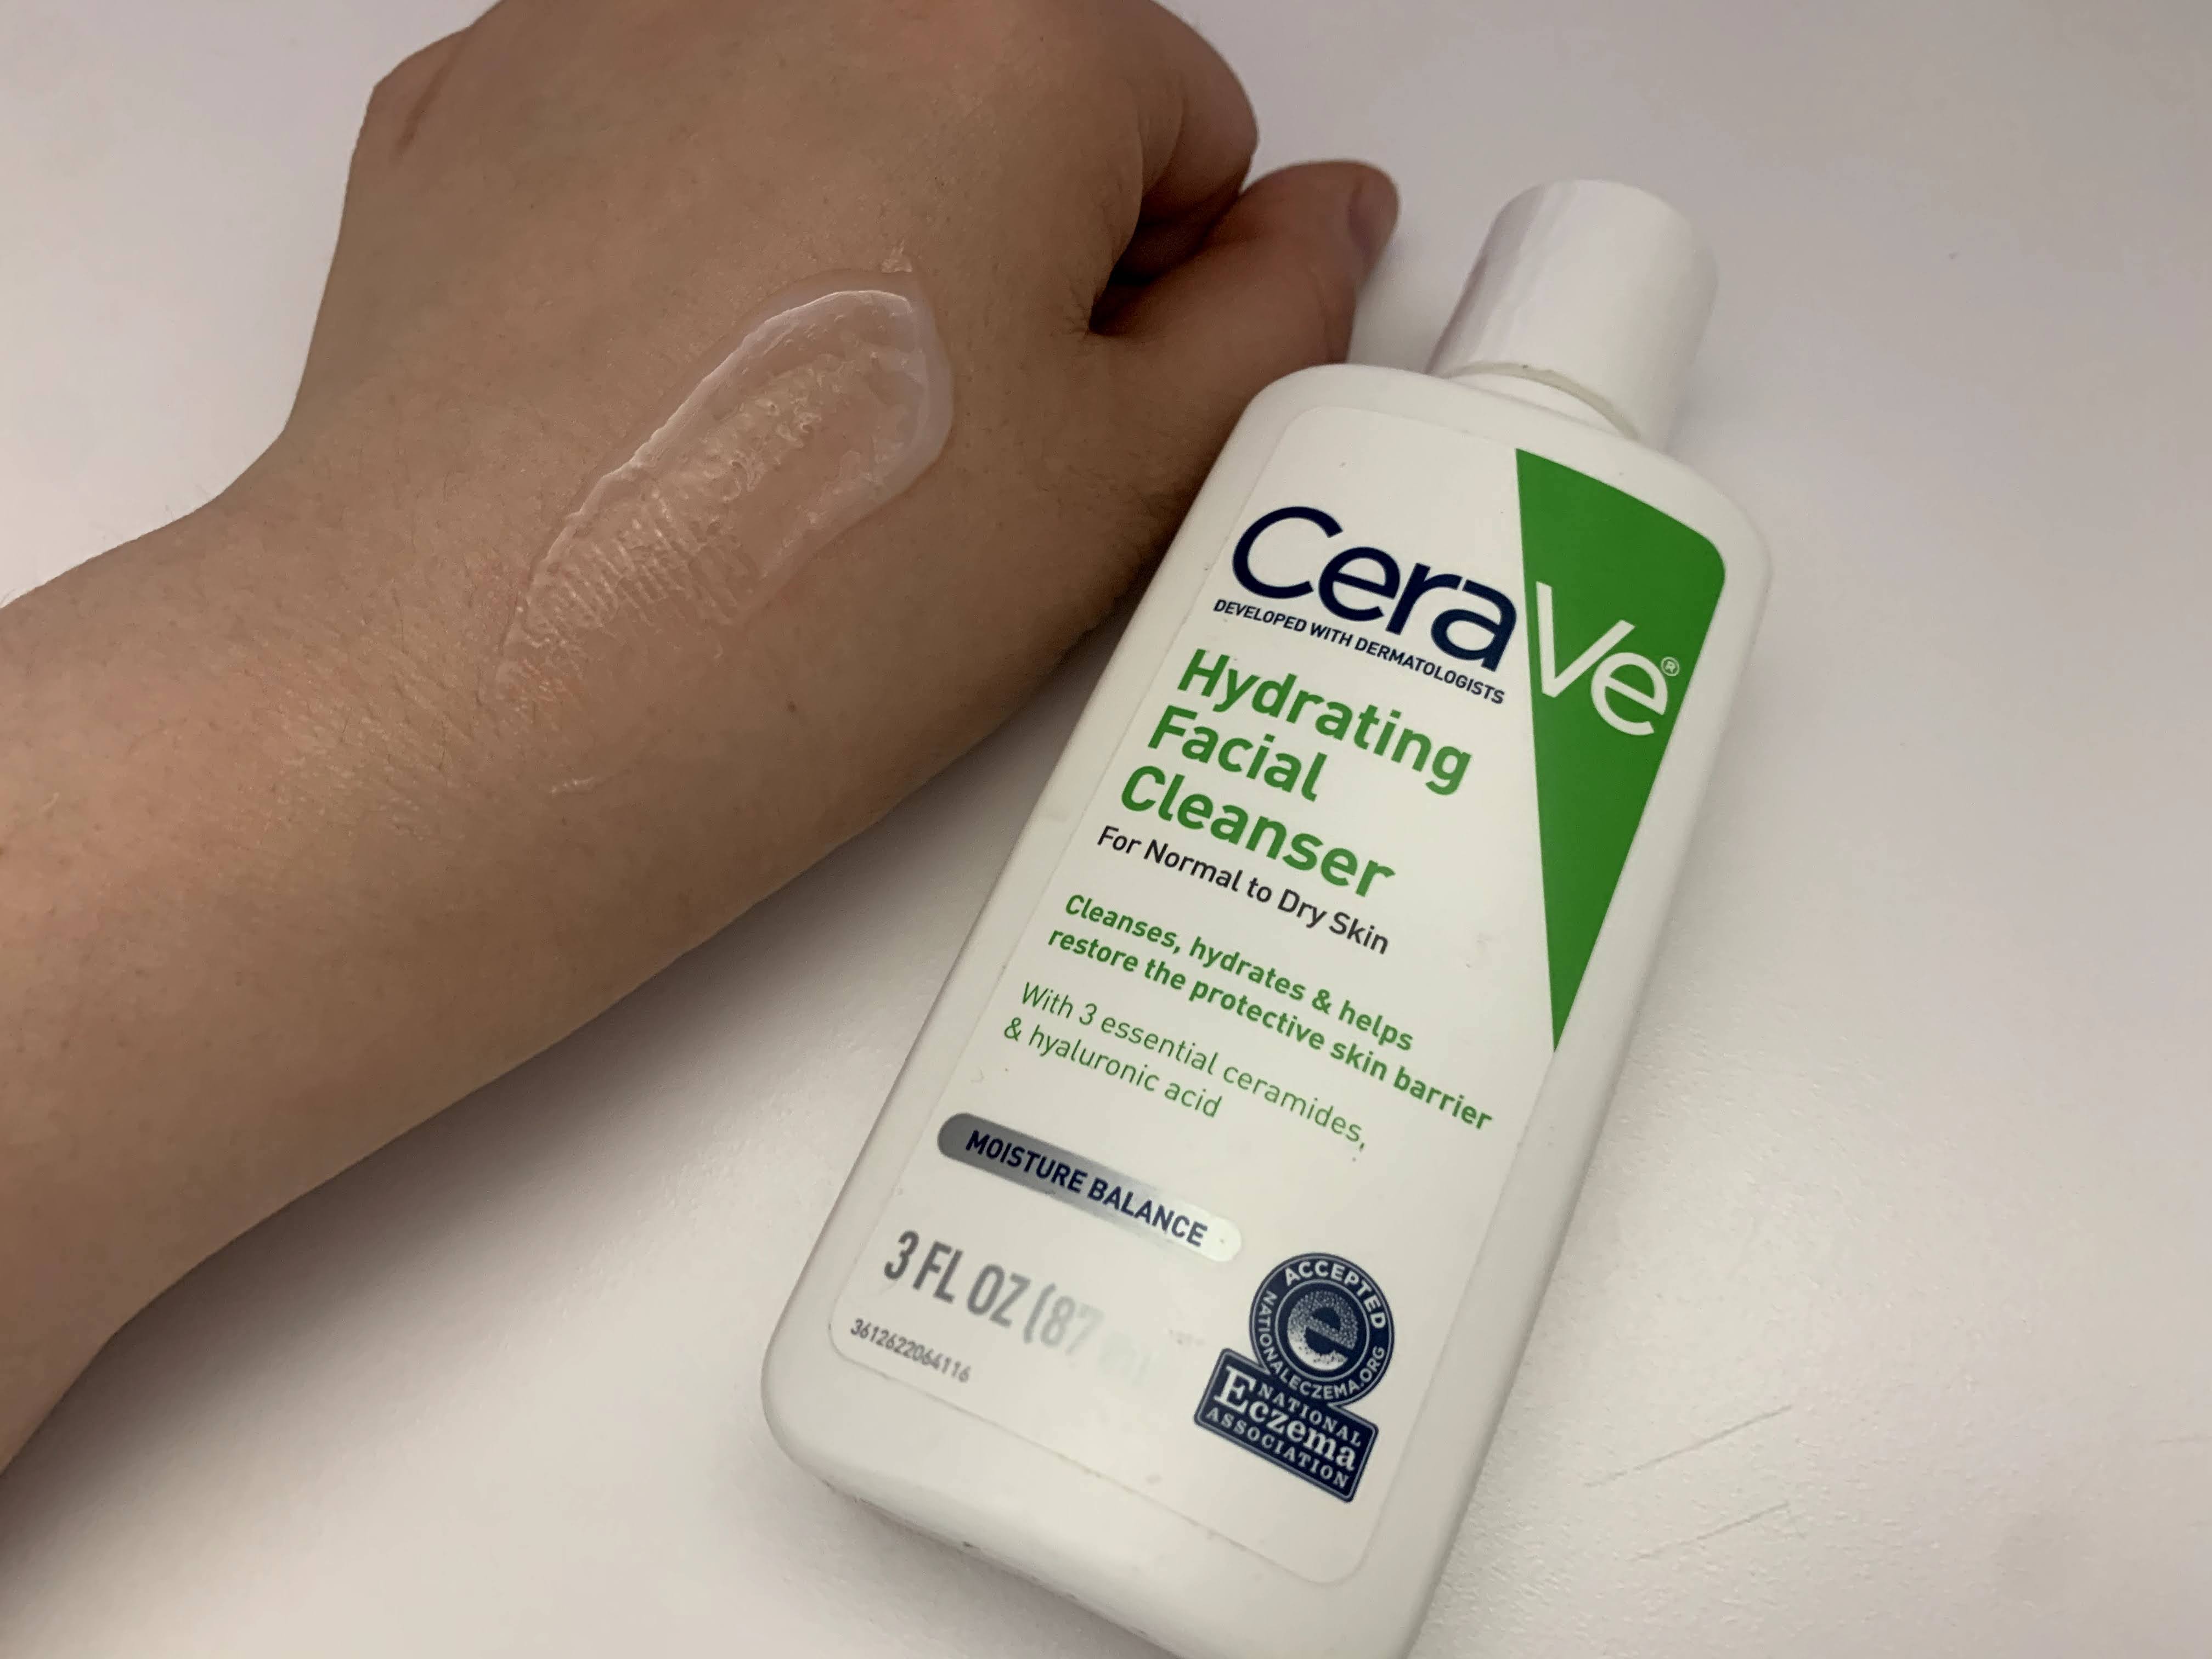 Drugstore Cleanser Review of the CeraVe Hydrating Facial Cleanser